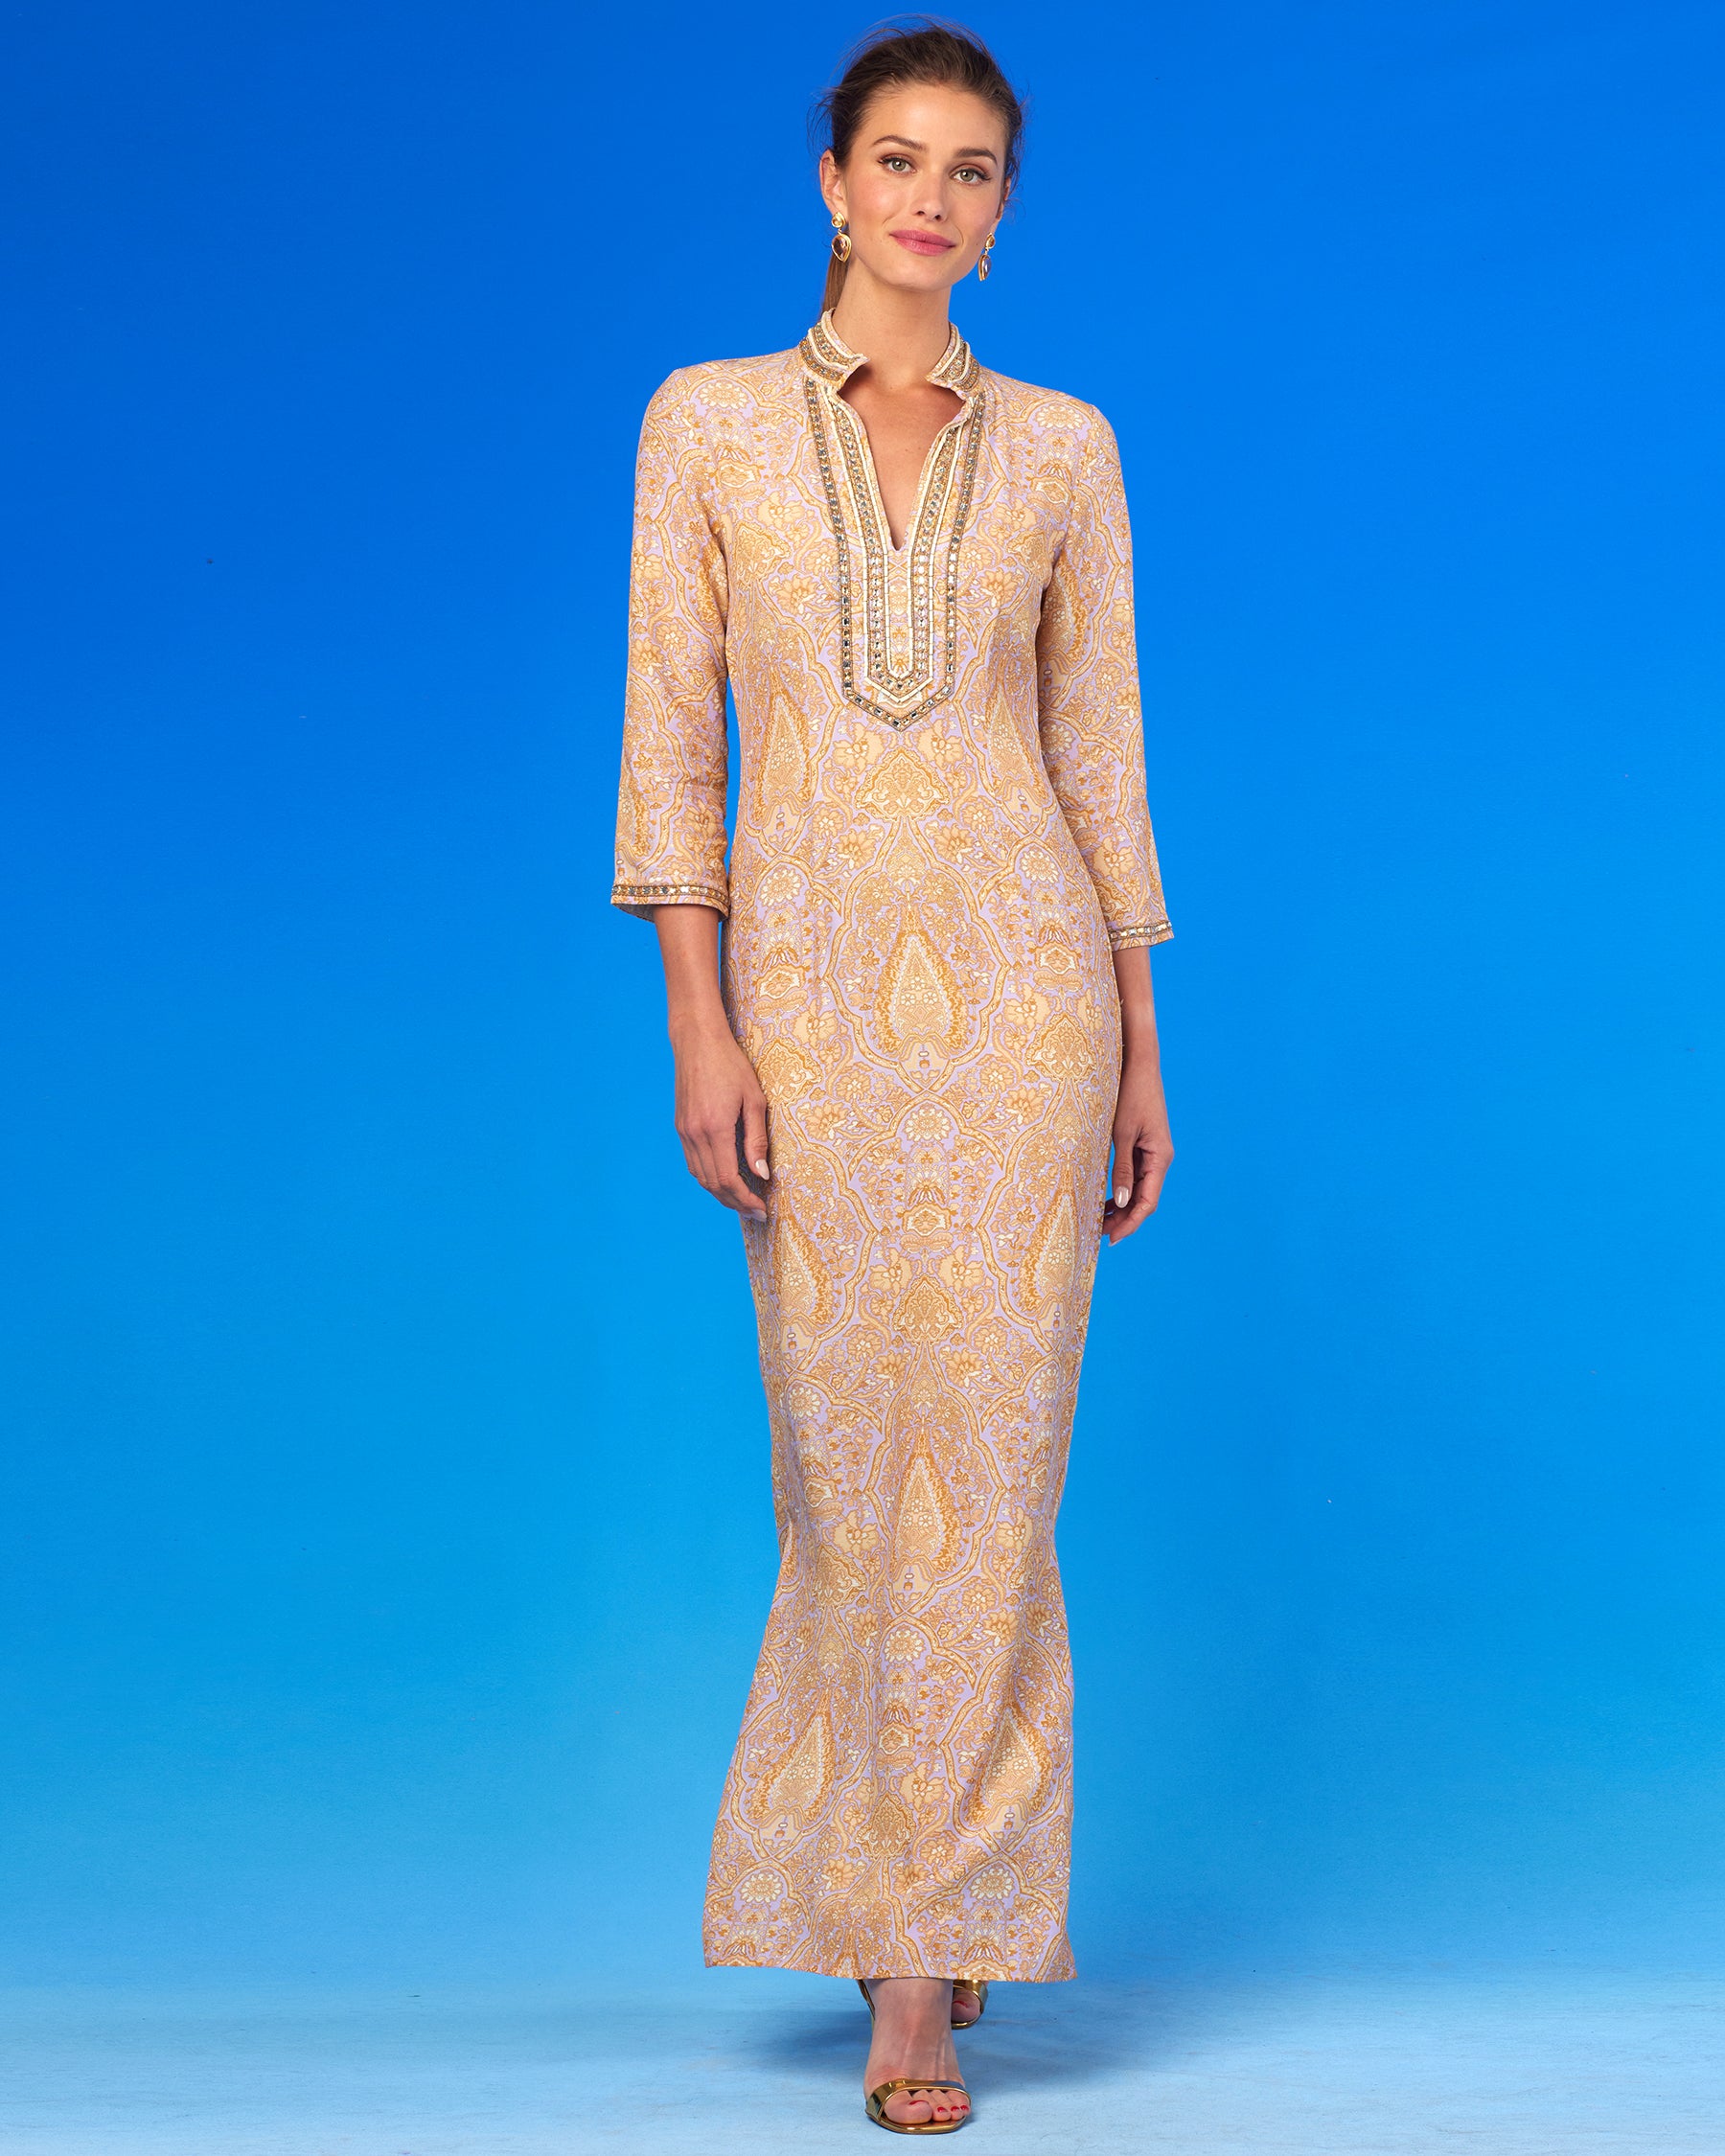 Laetitia Long Dress in Saffron on Lavender with Jewel Embellishment-Walking Front View